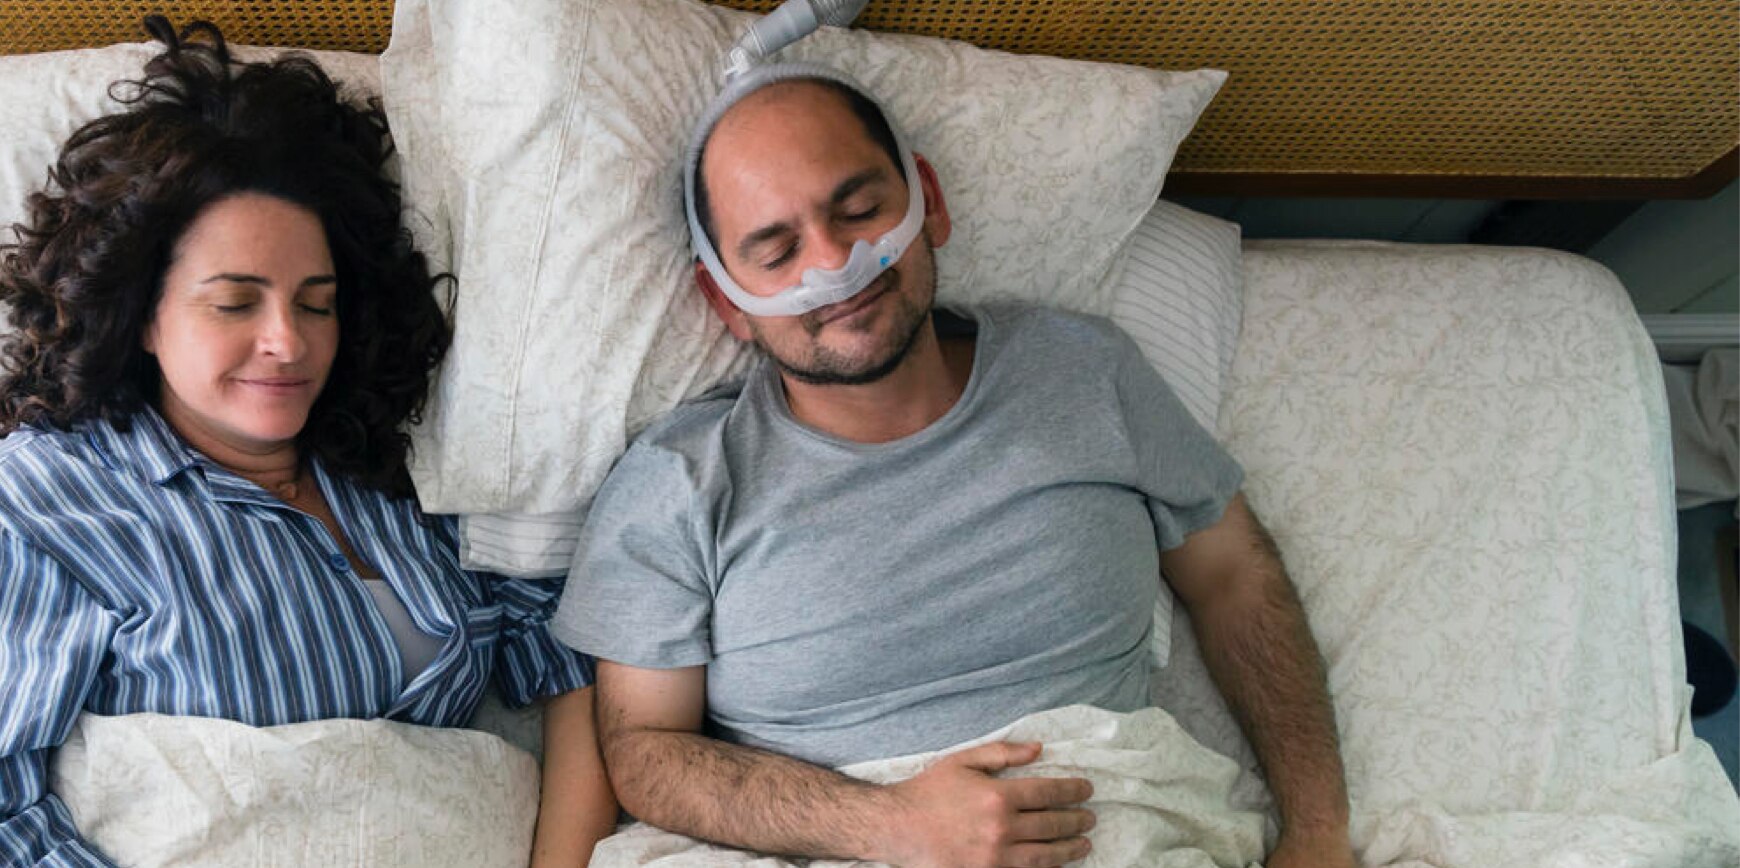 A couple sleeping peacefully in bed, where one person is wearing sleep apnea medical equipment.